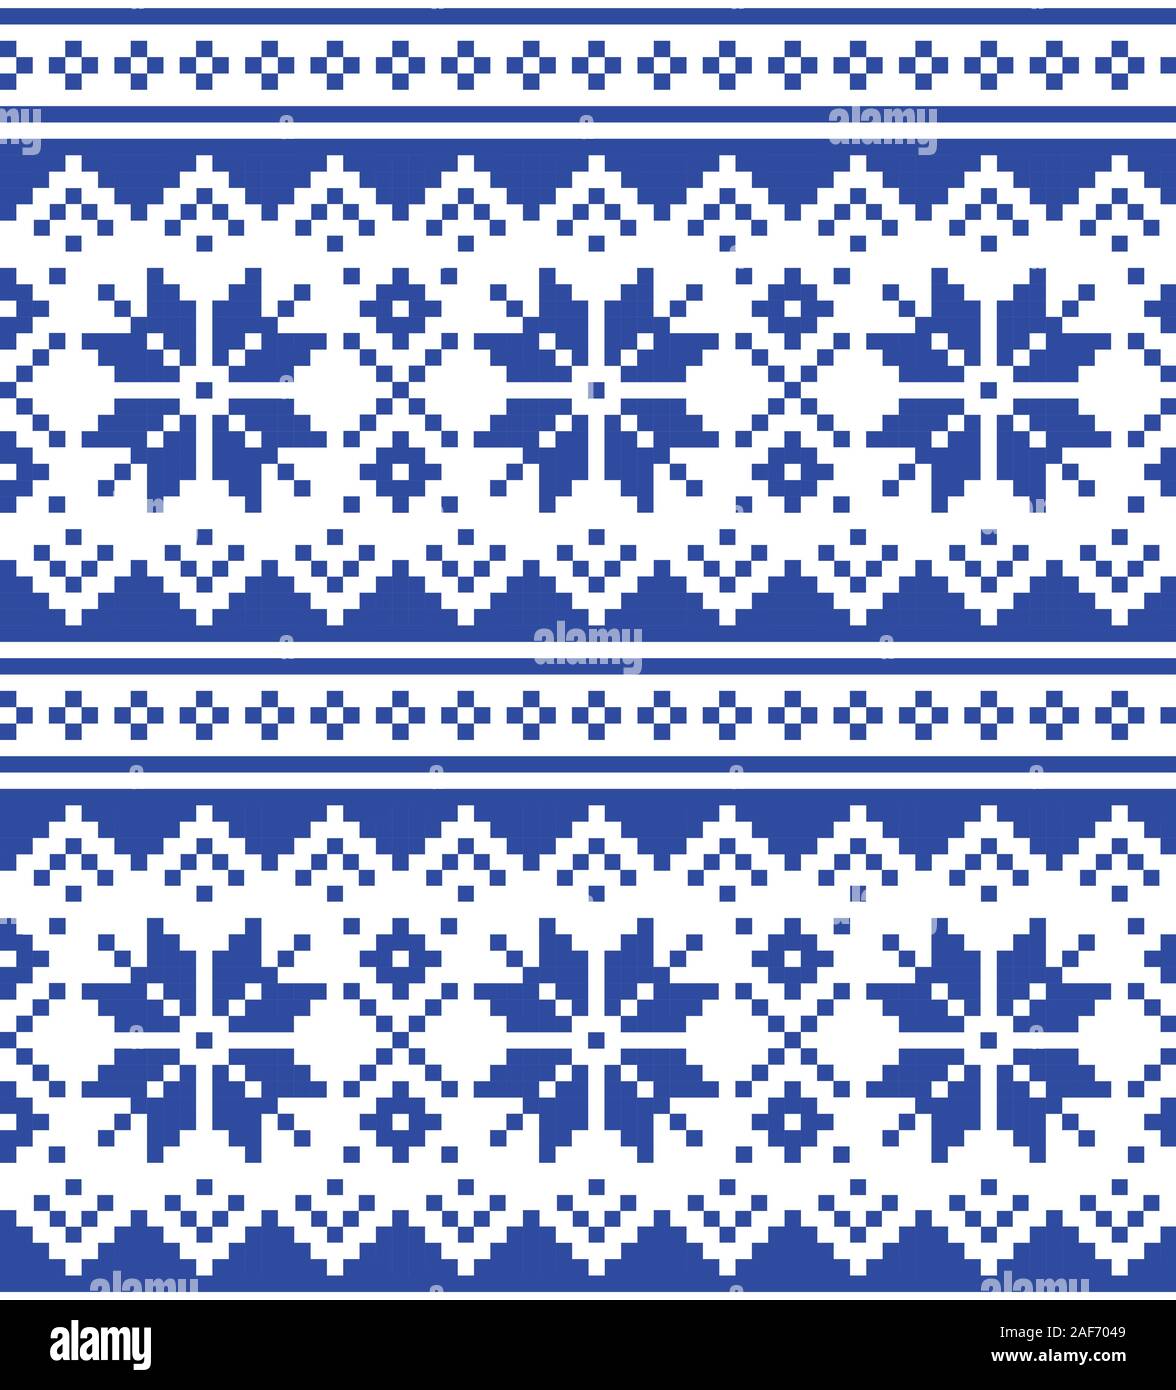 Christmas winter vector seamless navy blue pattern with snowflakes, inspired by Sami people, Lapland folk art design, traditional knitting and embroid Stock Vector